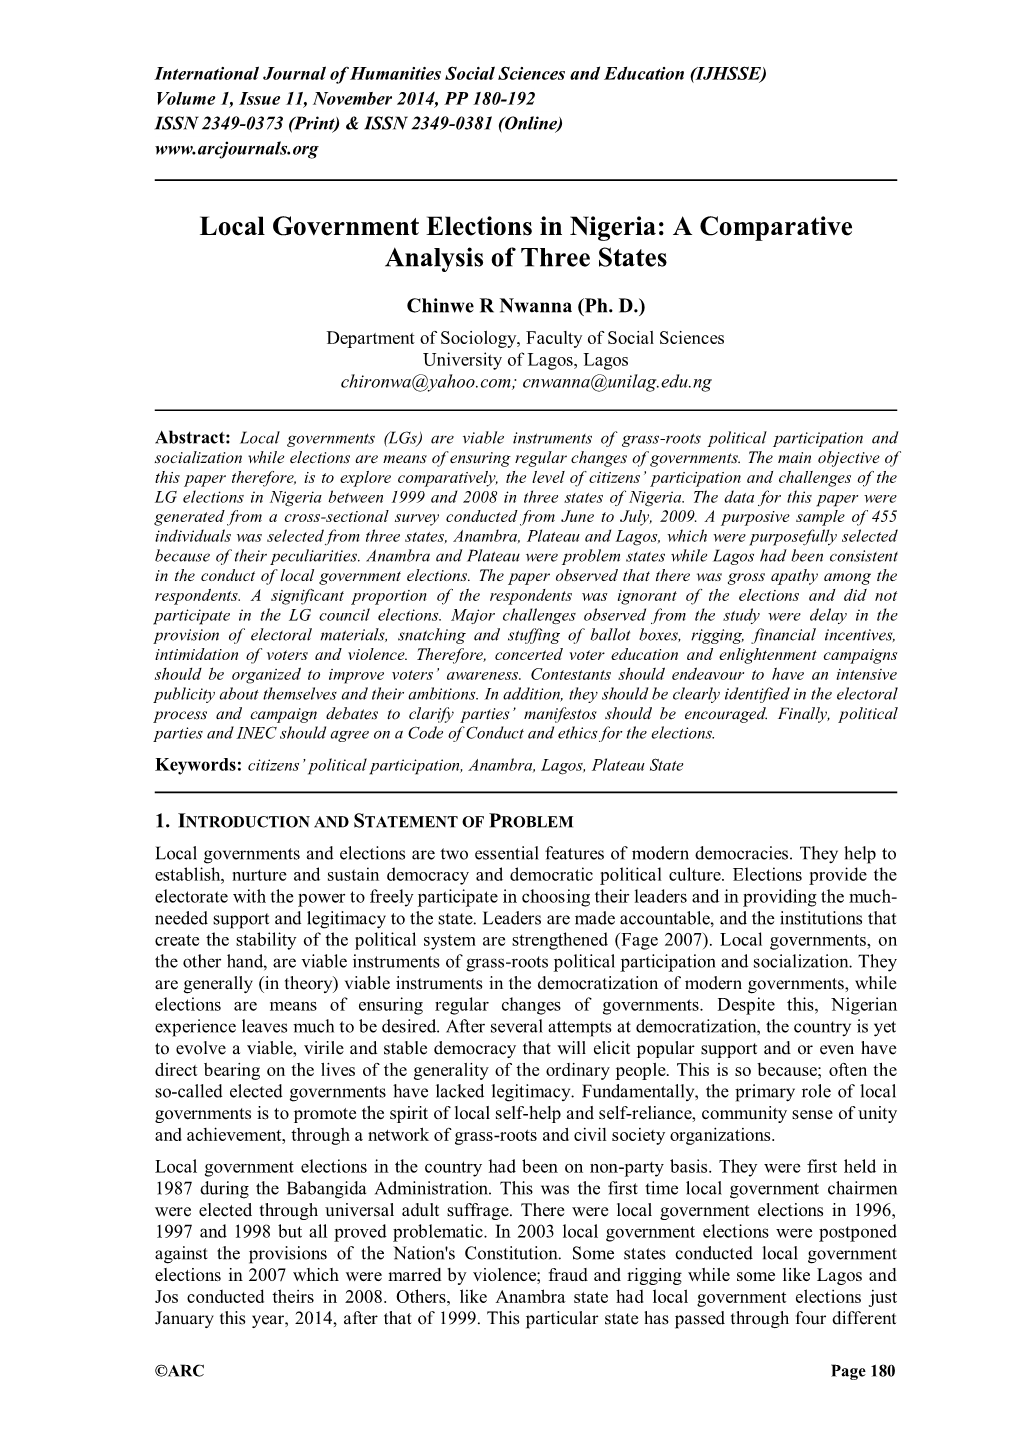 Local Government Elections in Nigeria: a Comparative Analysis of Three States